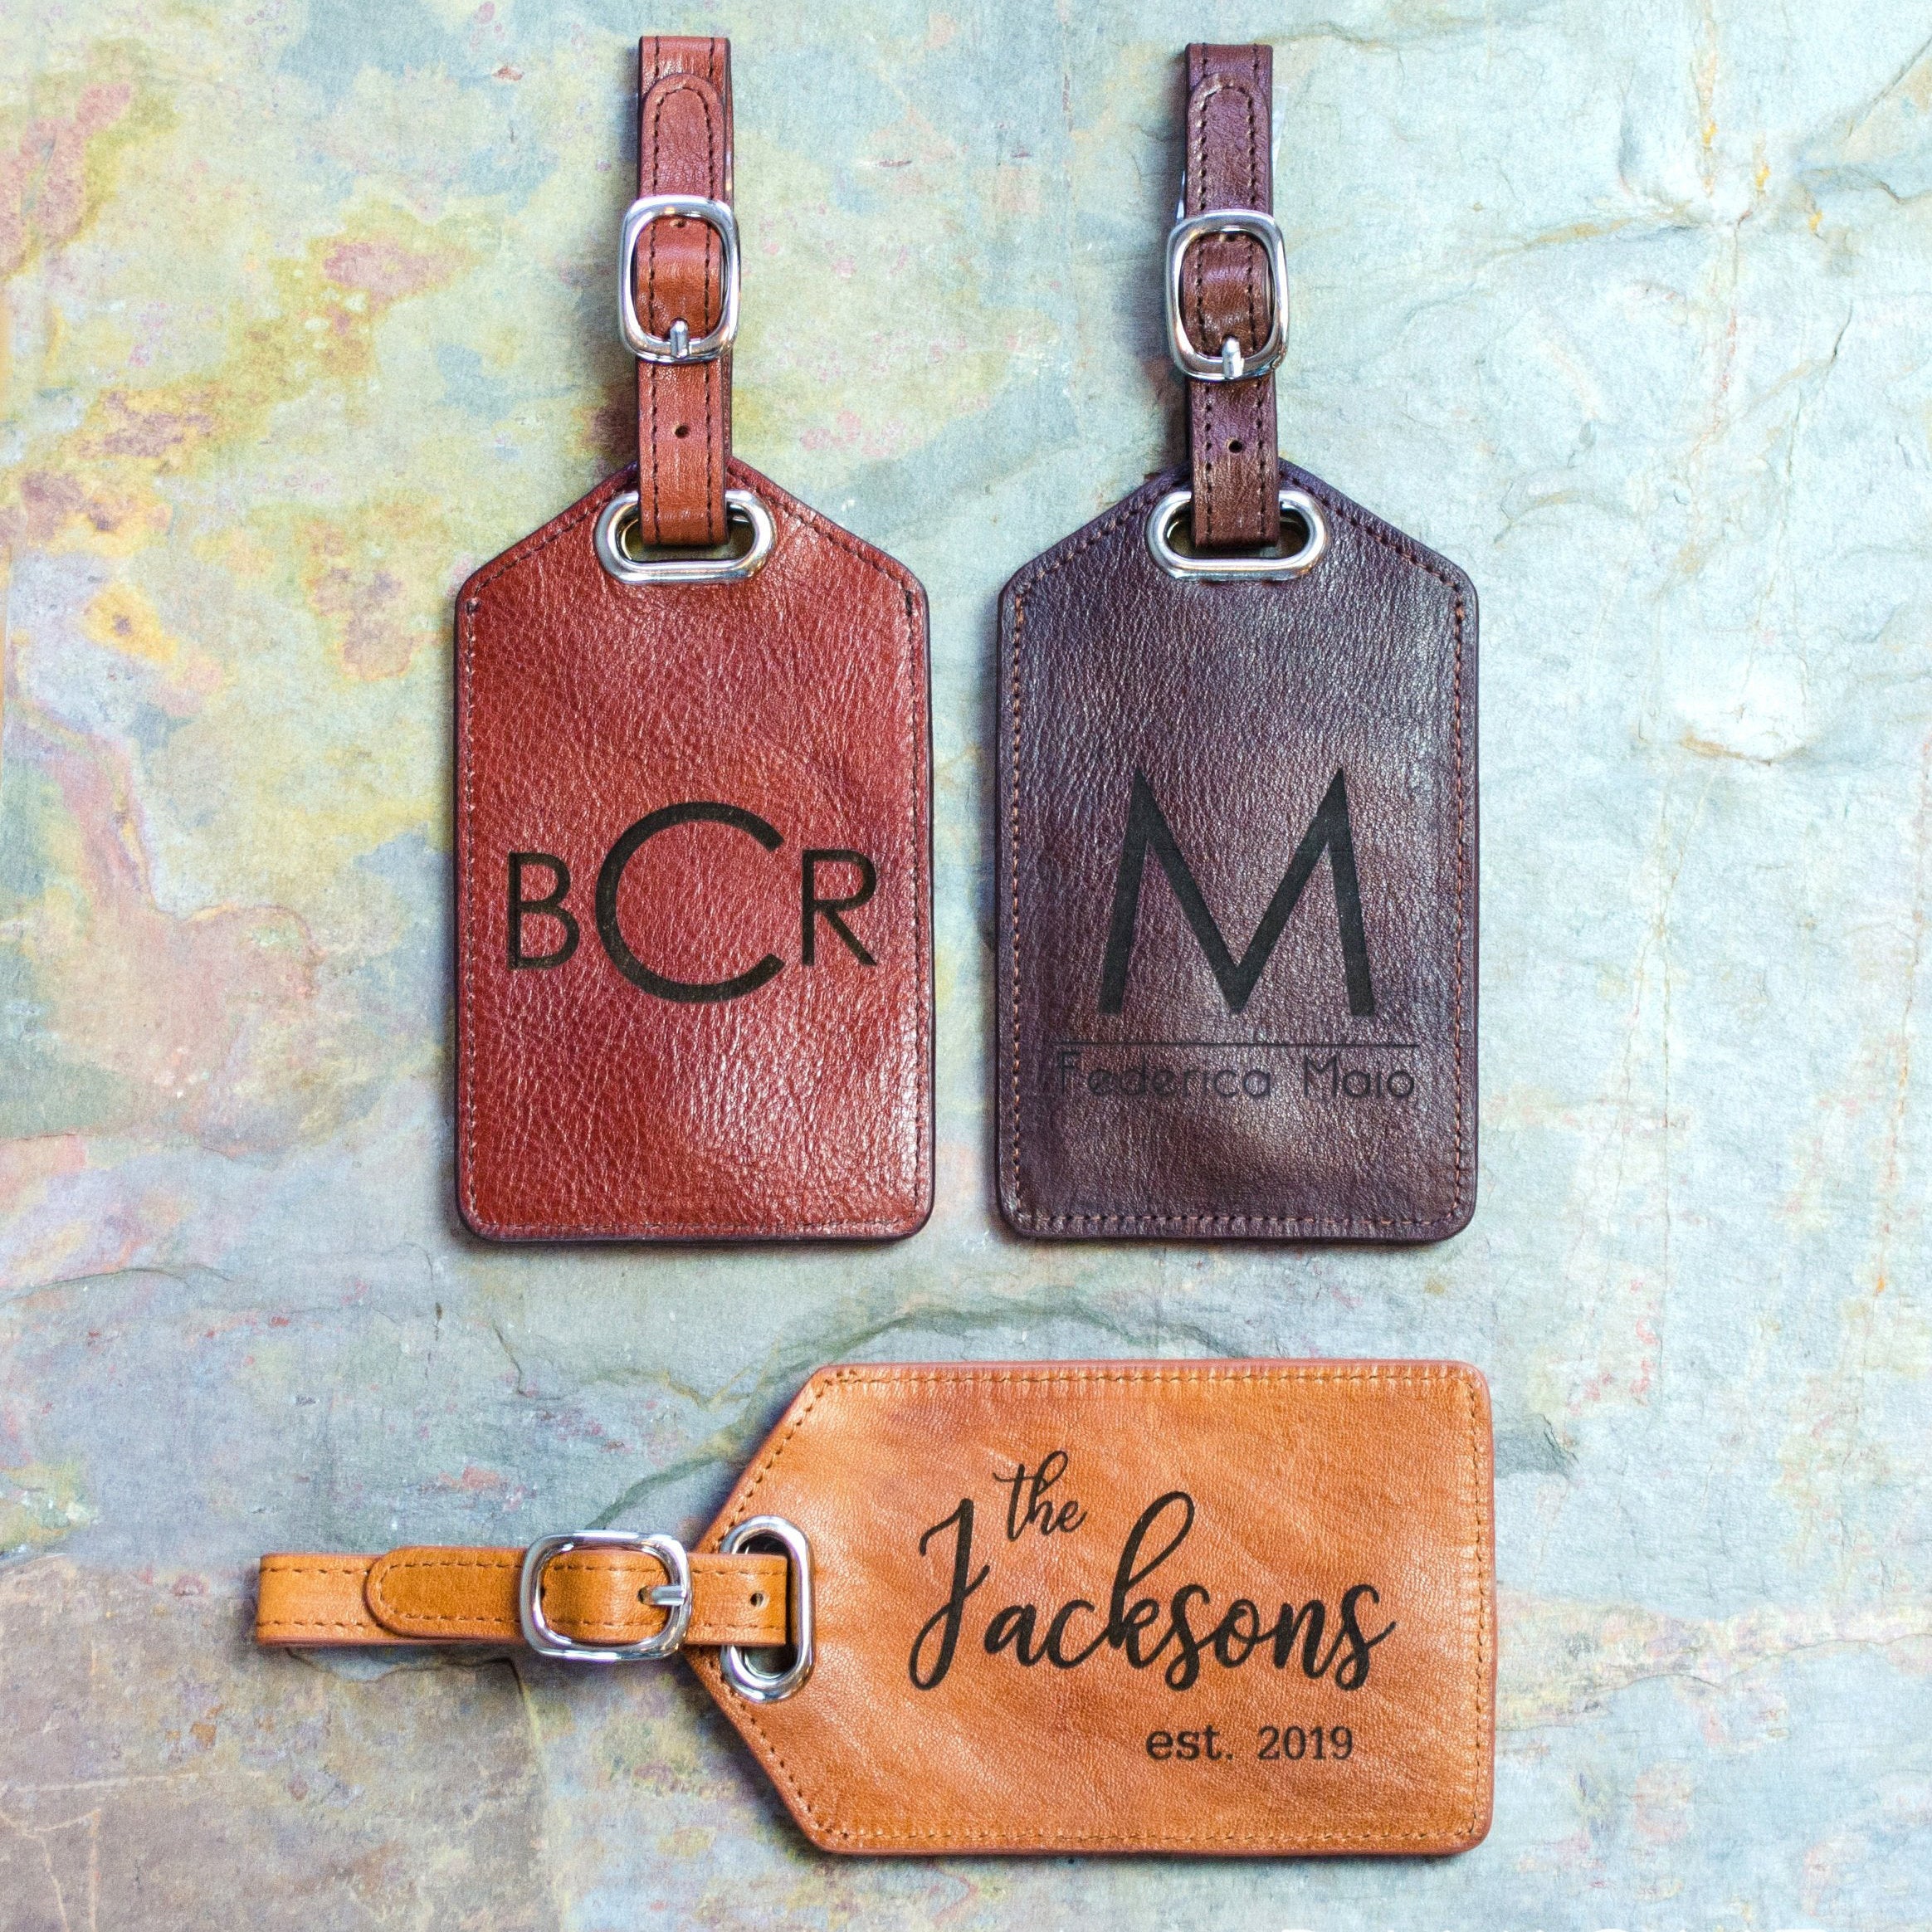  Personalized leather passport cover, passport holder and  luggage tag set, passport wallet, groomsmen gift, monogram passport case,  gifts for travelers - Father's Day Gift. : Handmade Products